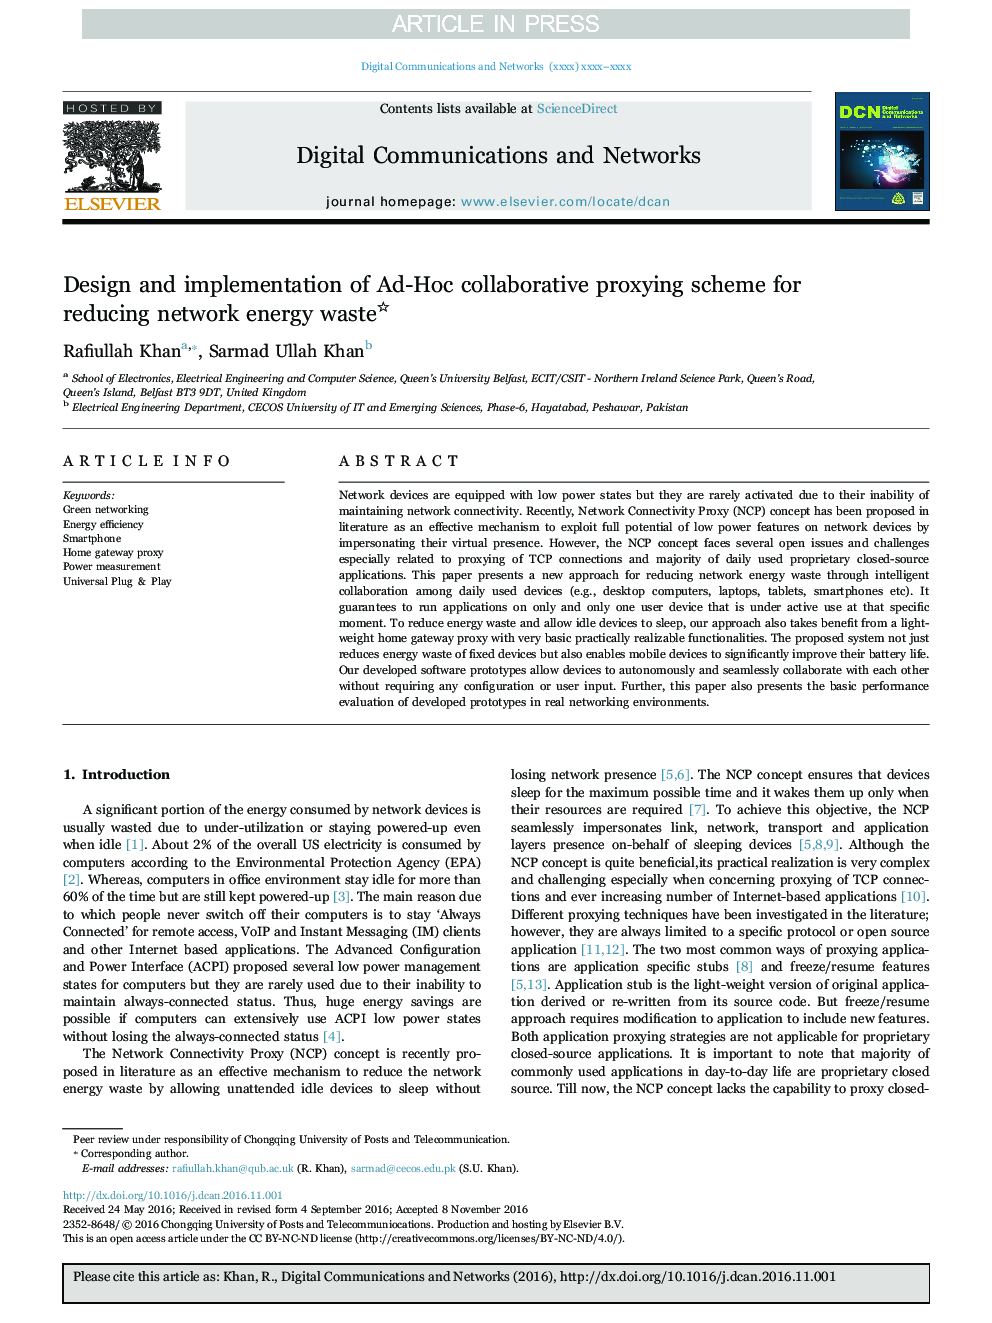 Design and implementation of Ad-Hoc collaborative proxying scheme for reducing network energy waste